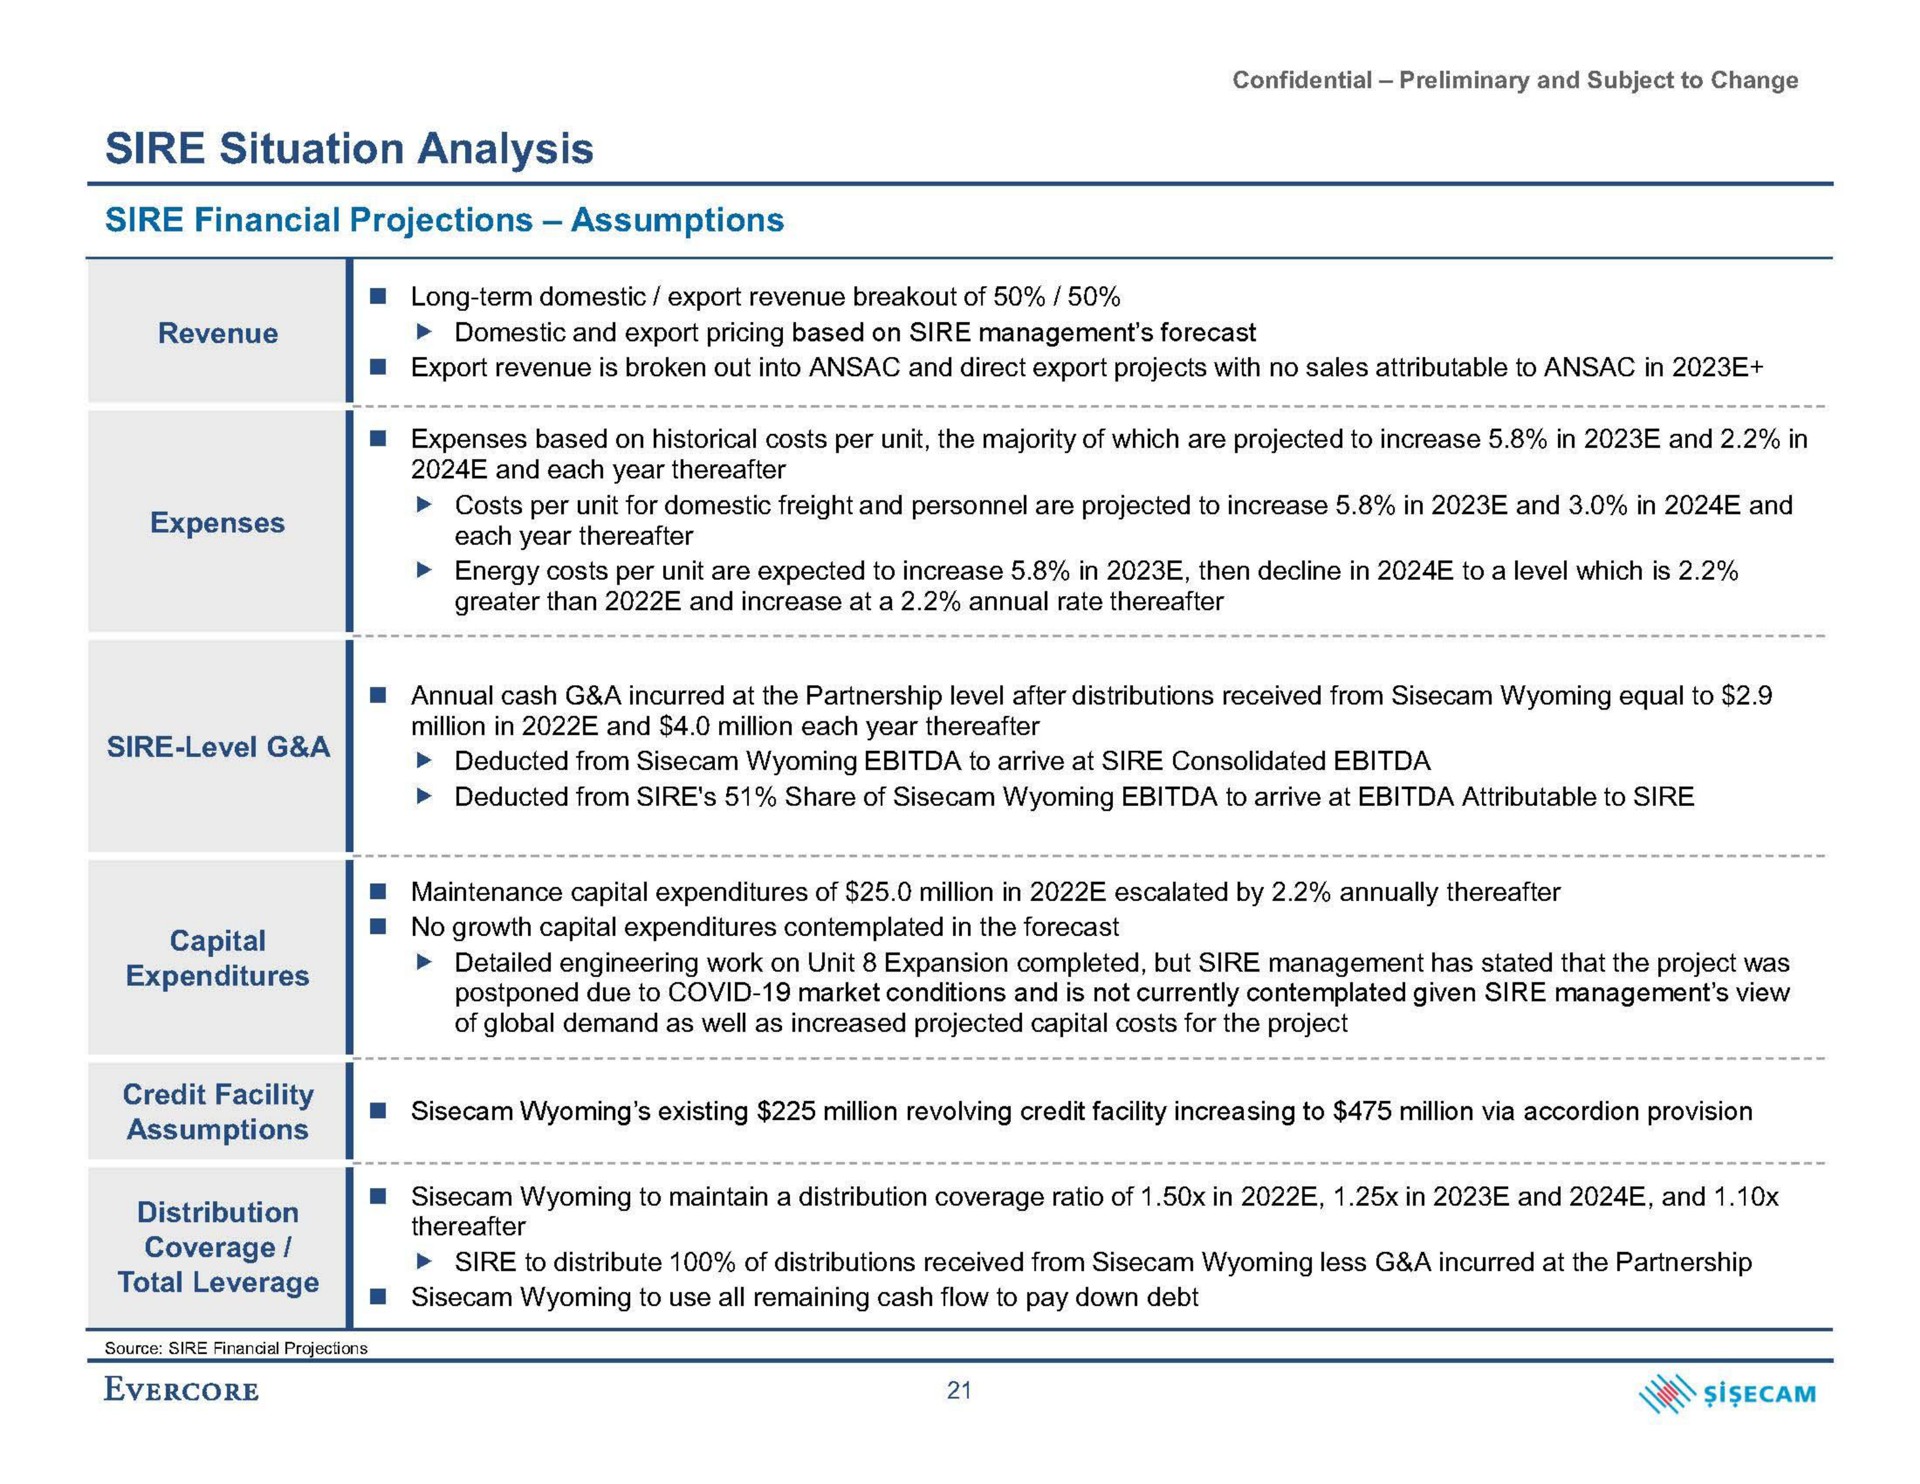 sire situation analysis sire financial projections assumptions sire level a | Evercore